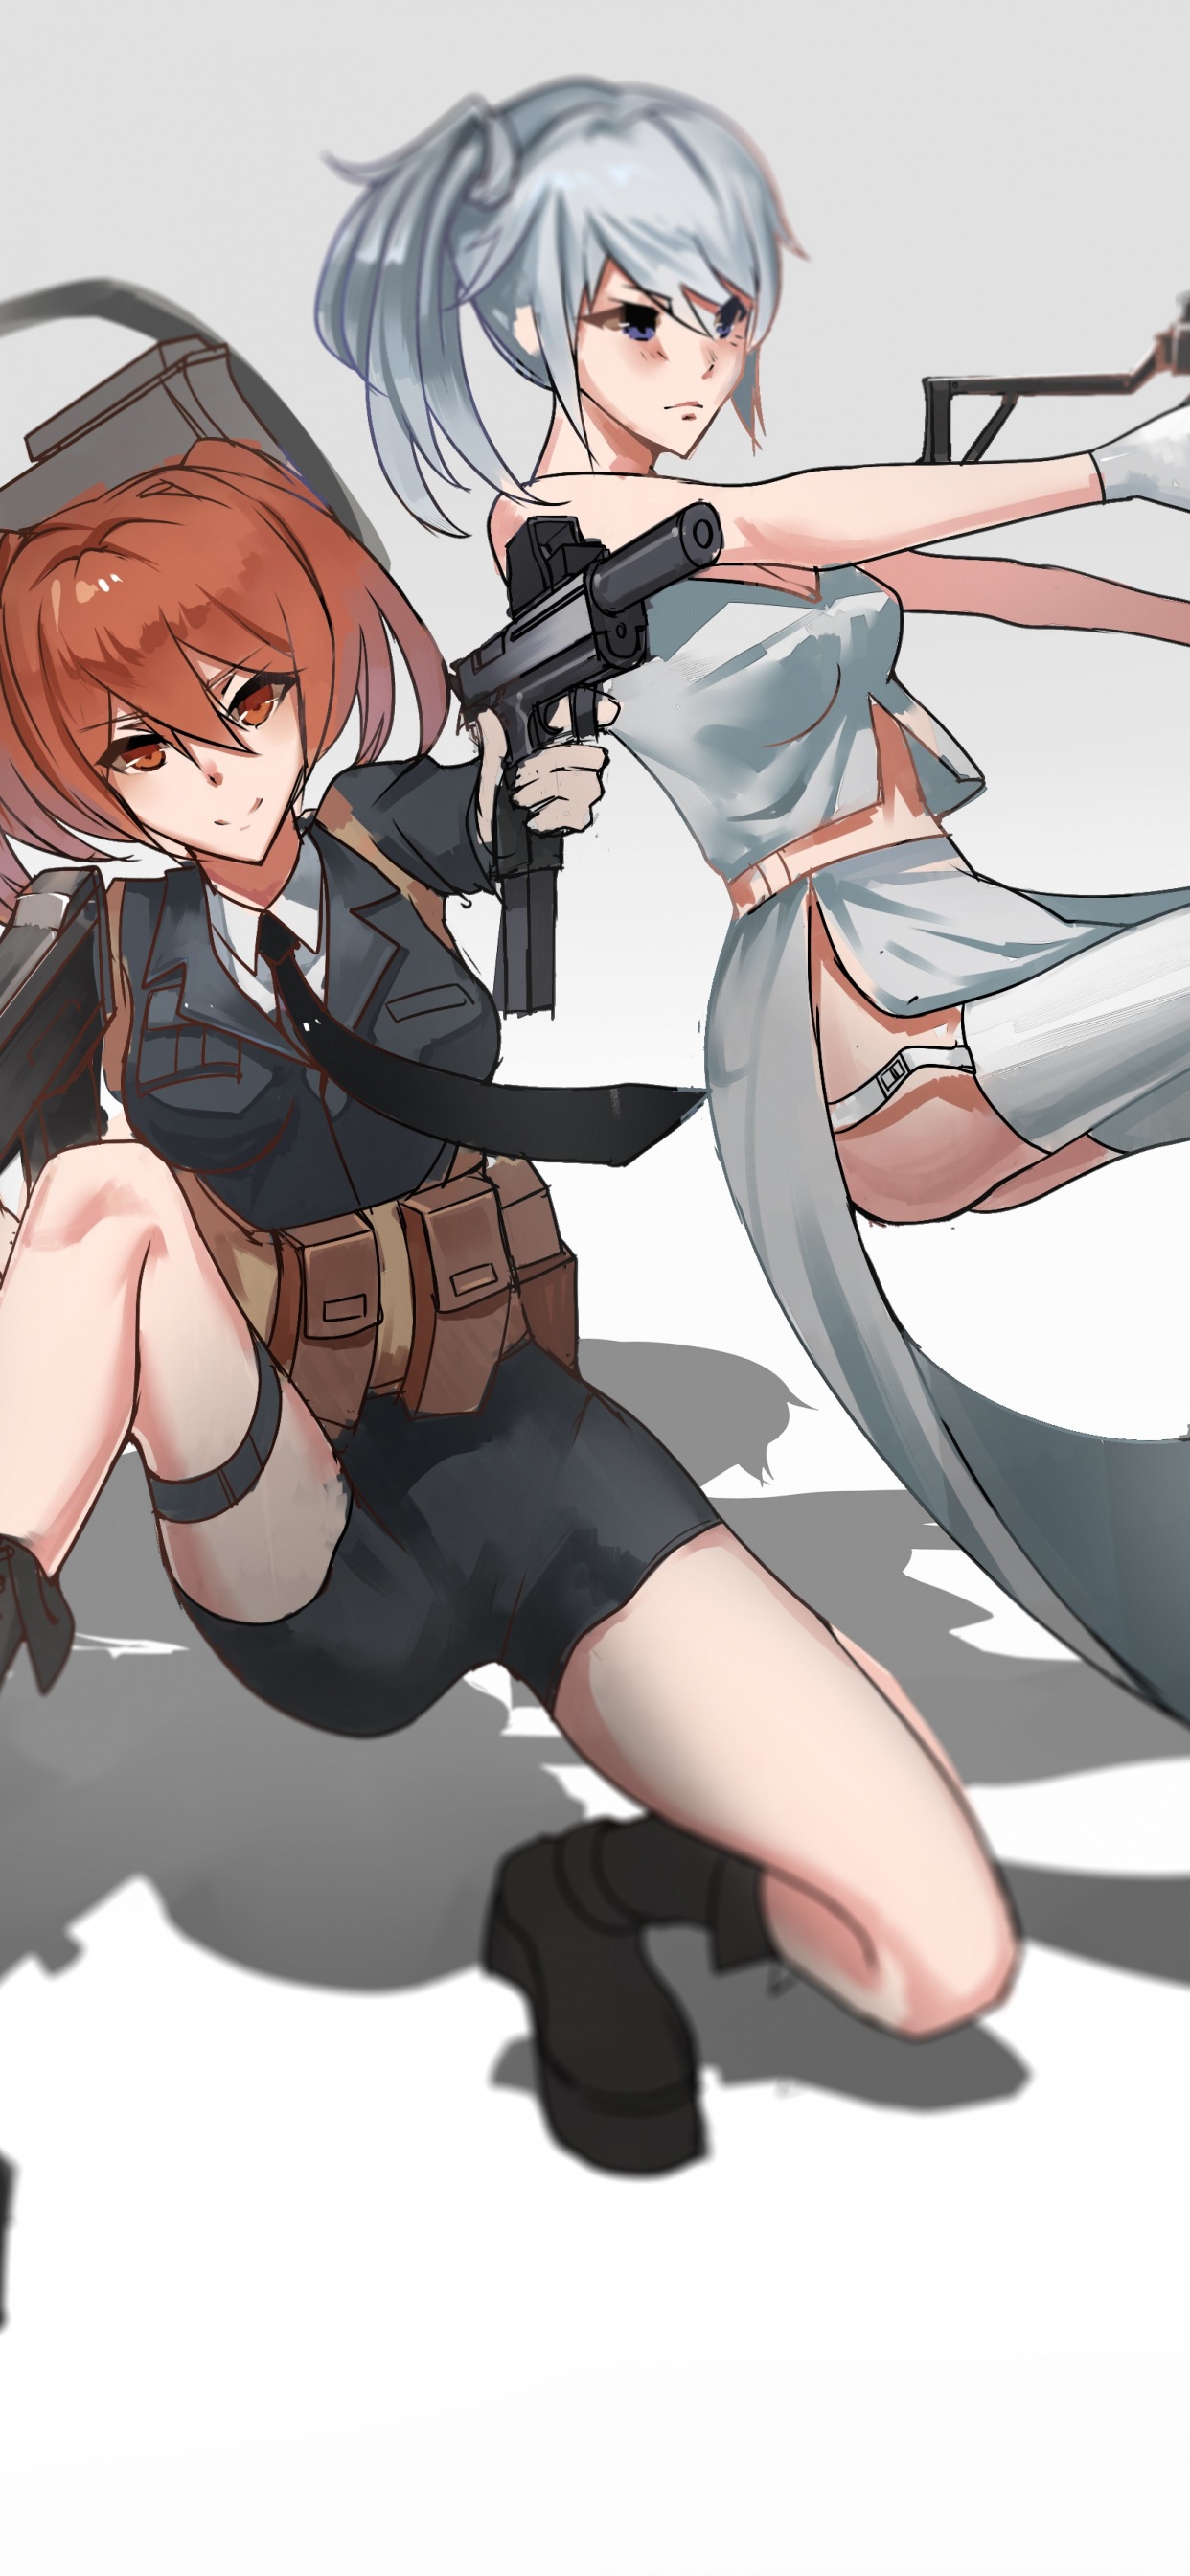 Woman in Black and White Dress Holding Rifle Anime Character. Wallpaper in 1242x2688 Resolution